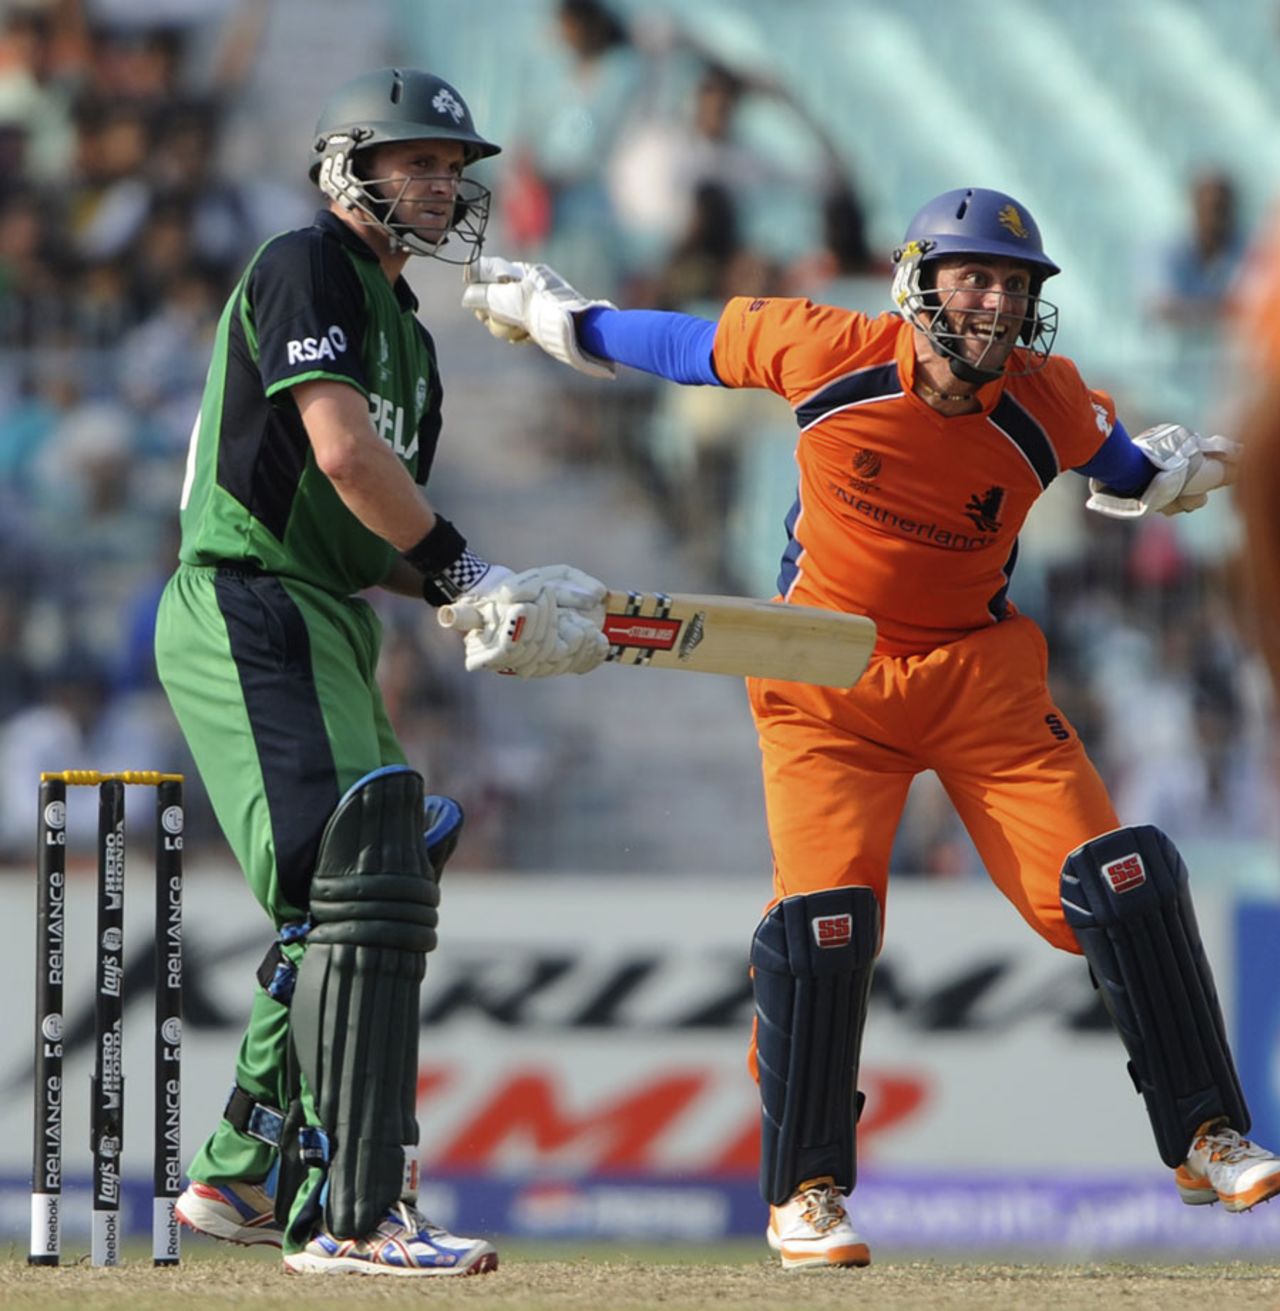 Atse Buurman is thrilled after taking a catch to dismiss William Porterfield, Ireland v Netherlands, World Cup 2011, Group B, March 18, 2011